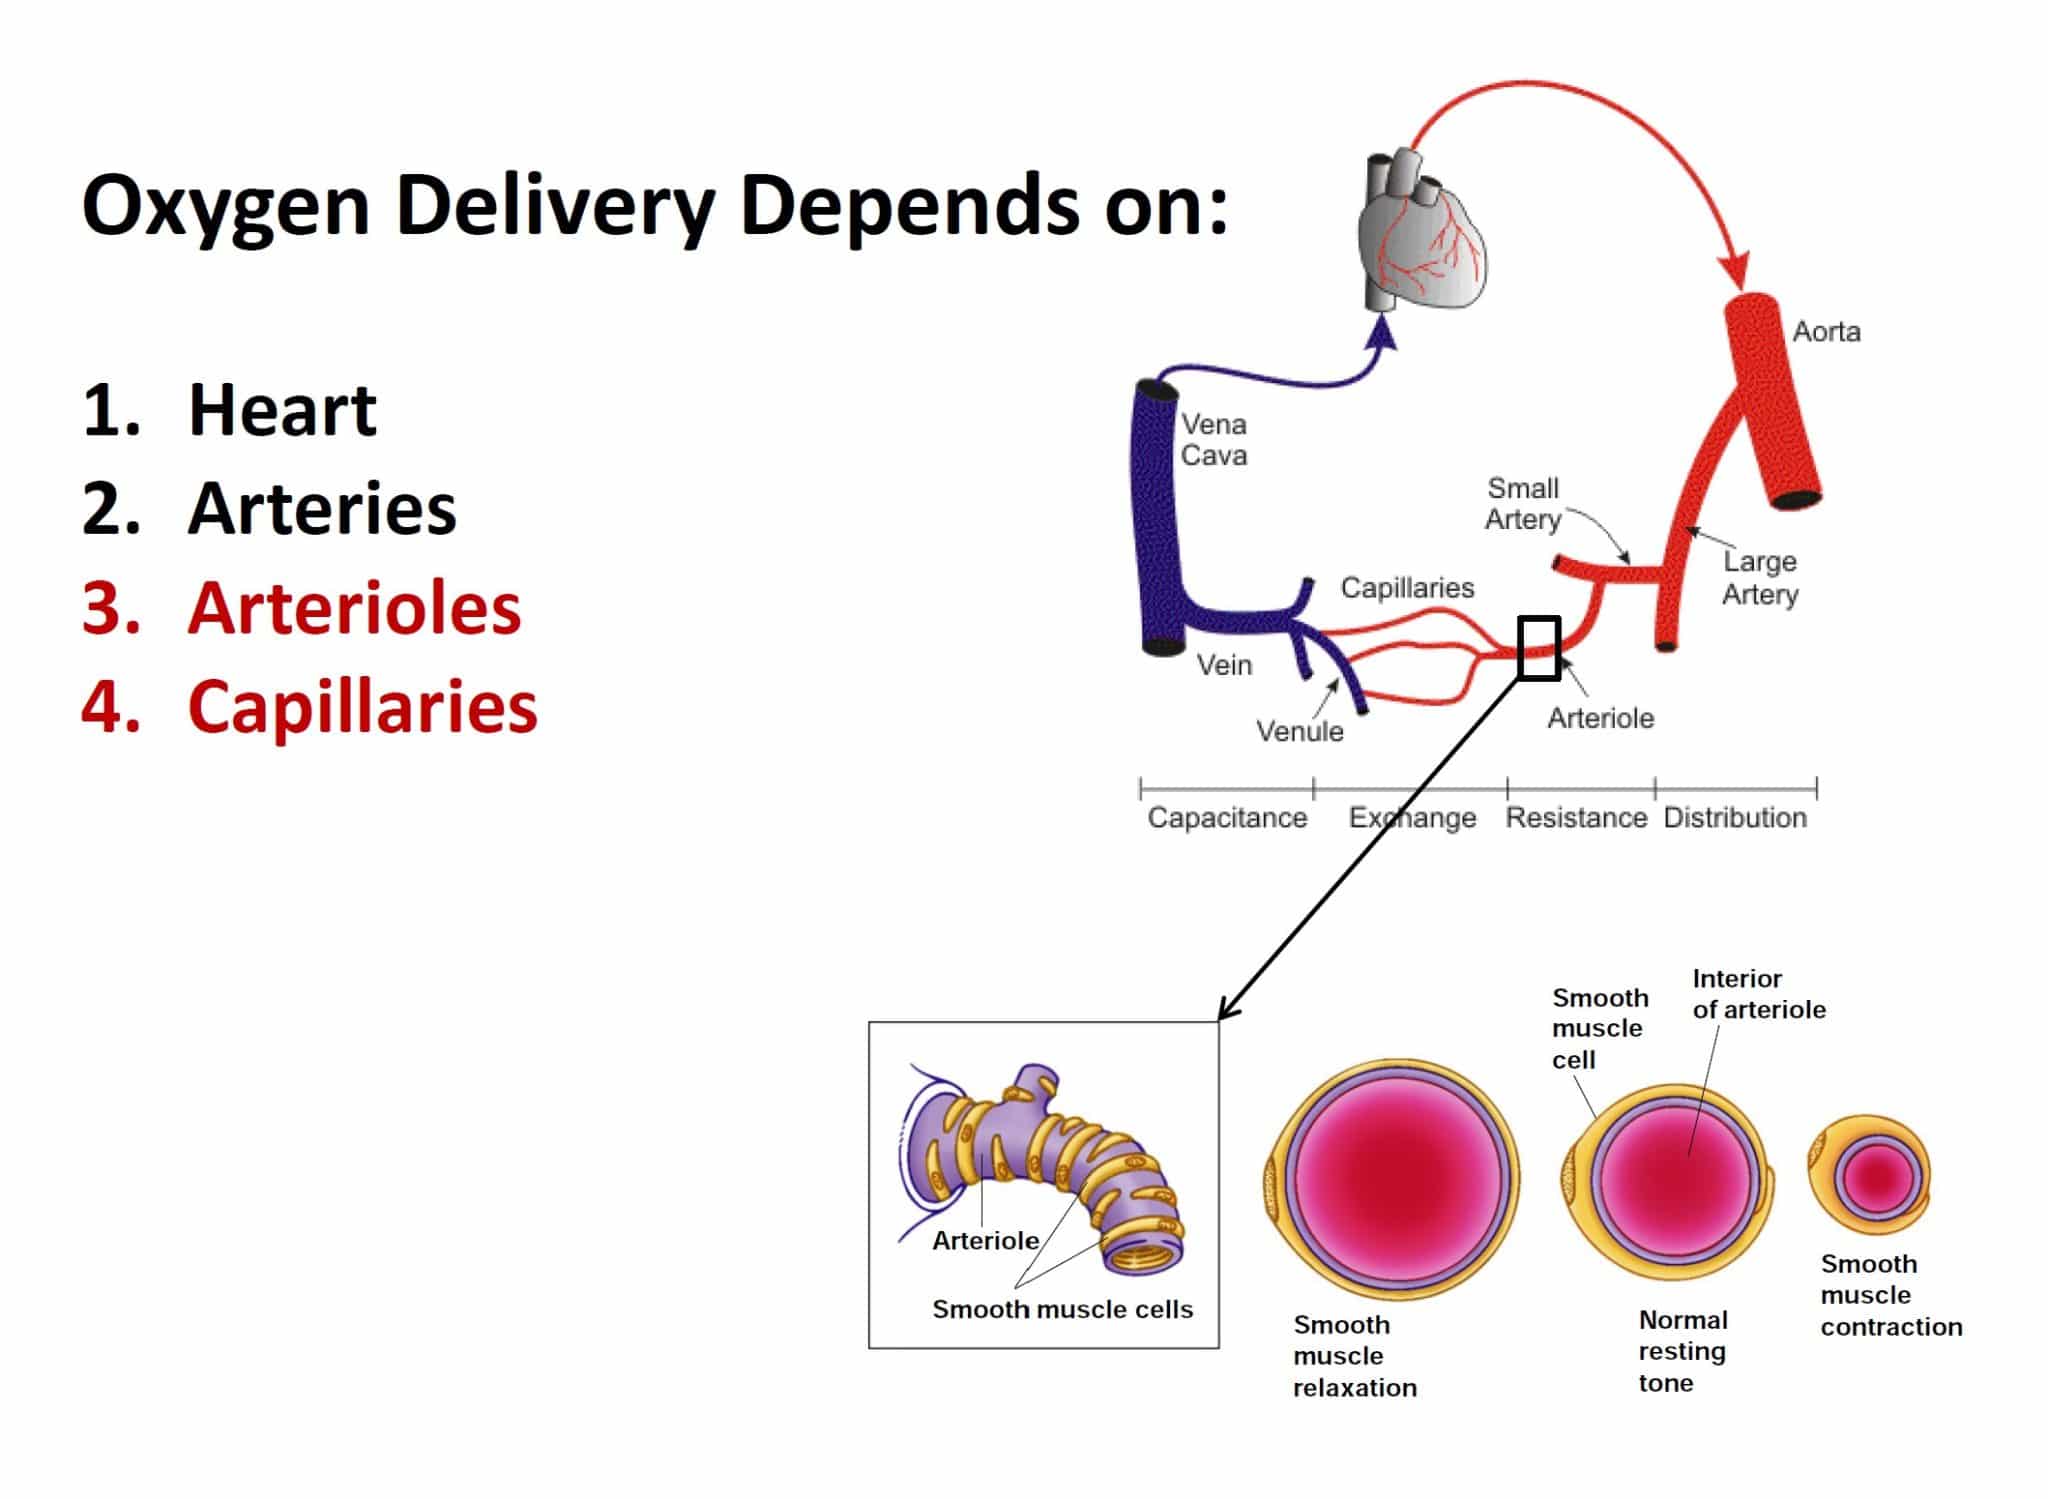 Oxygen delivery in the body depends on adequate capillary, microcirculatory blood flow